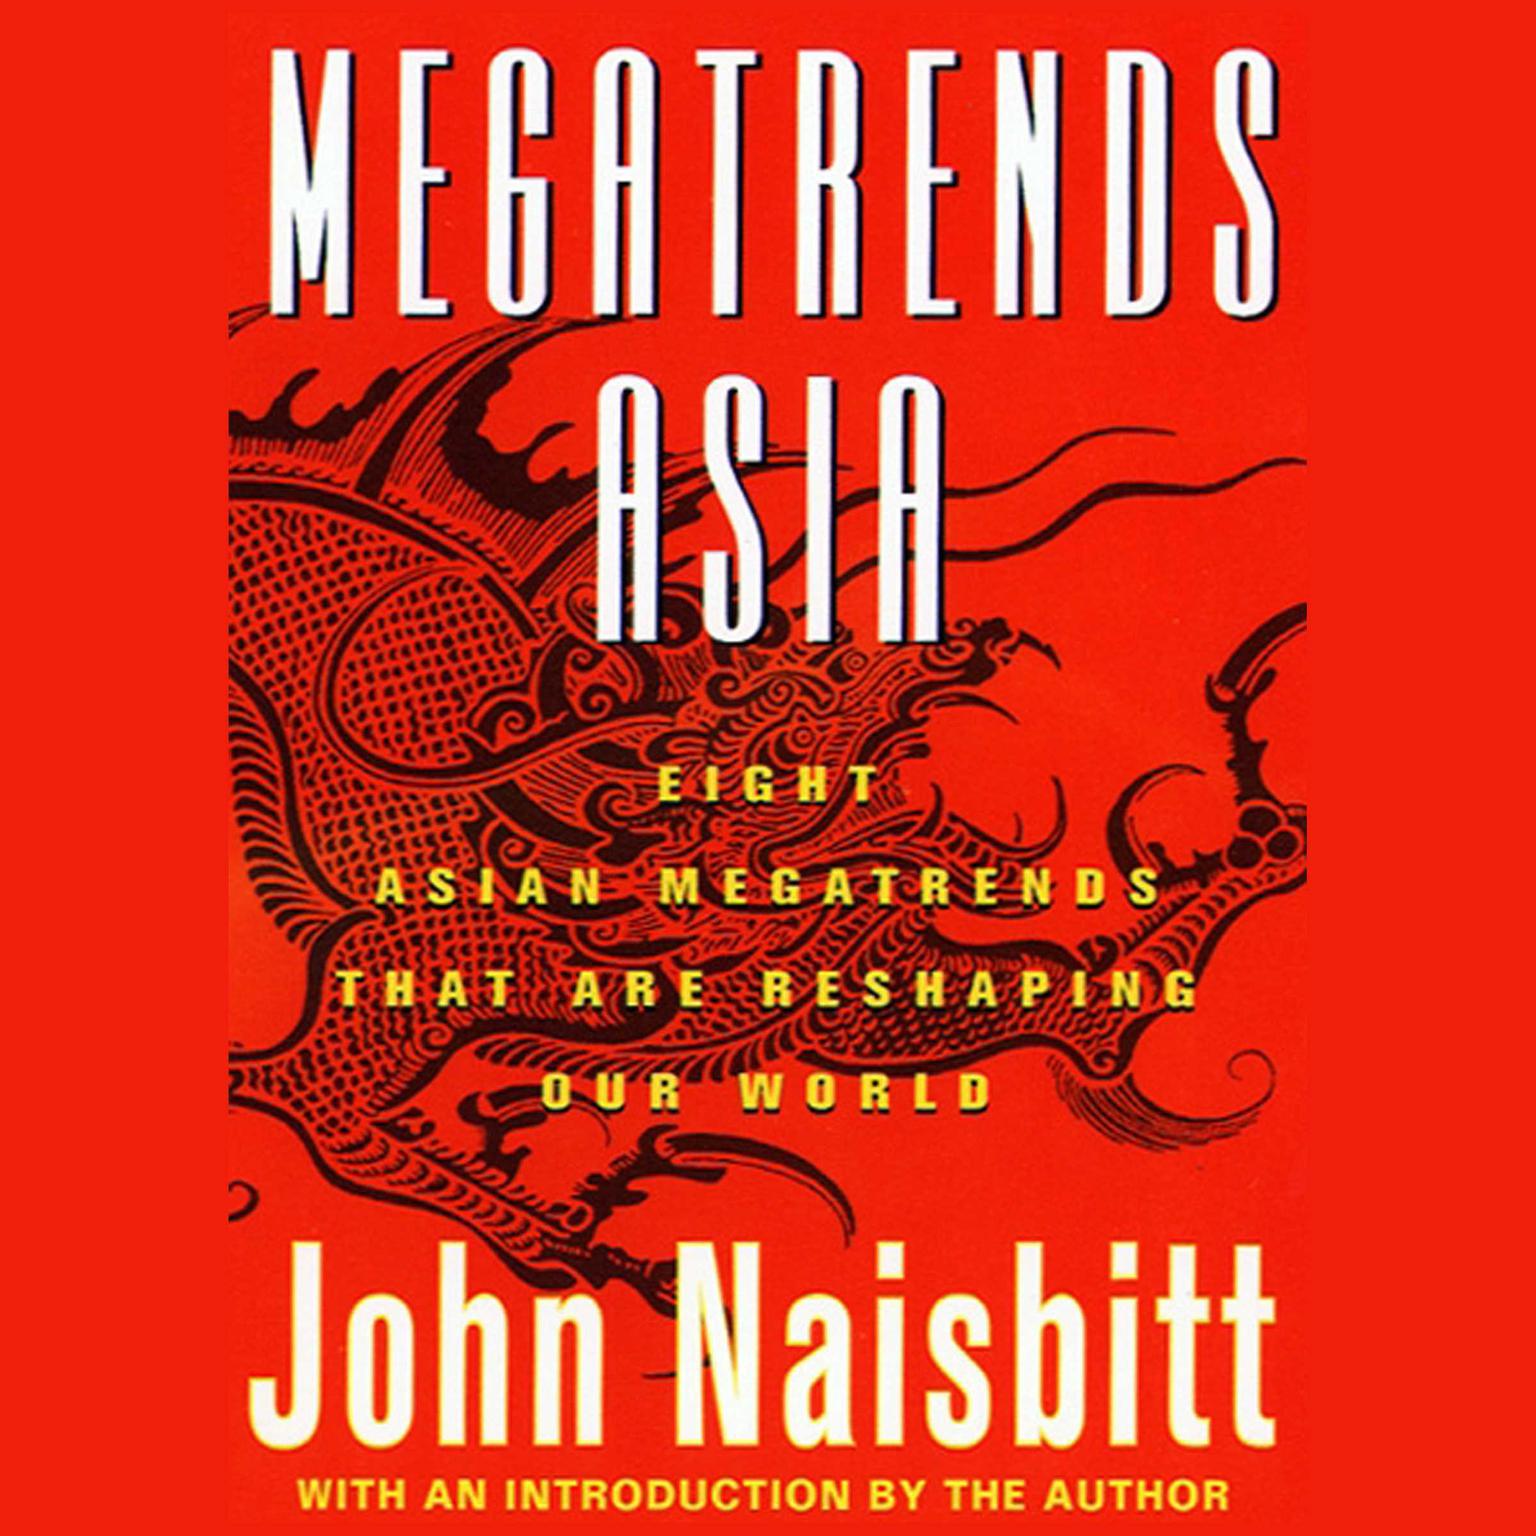 Megatrends Asia (Abridged): Eight Asian Megatrends That Are Reshaping Our World Audiobook, by John Naisbitt